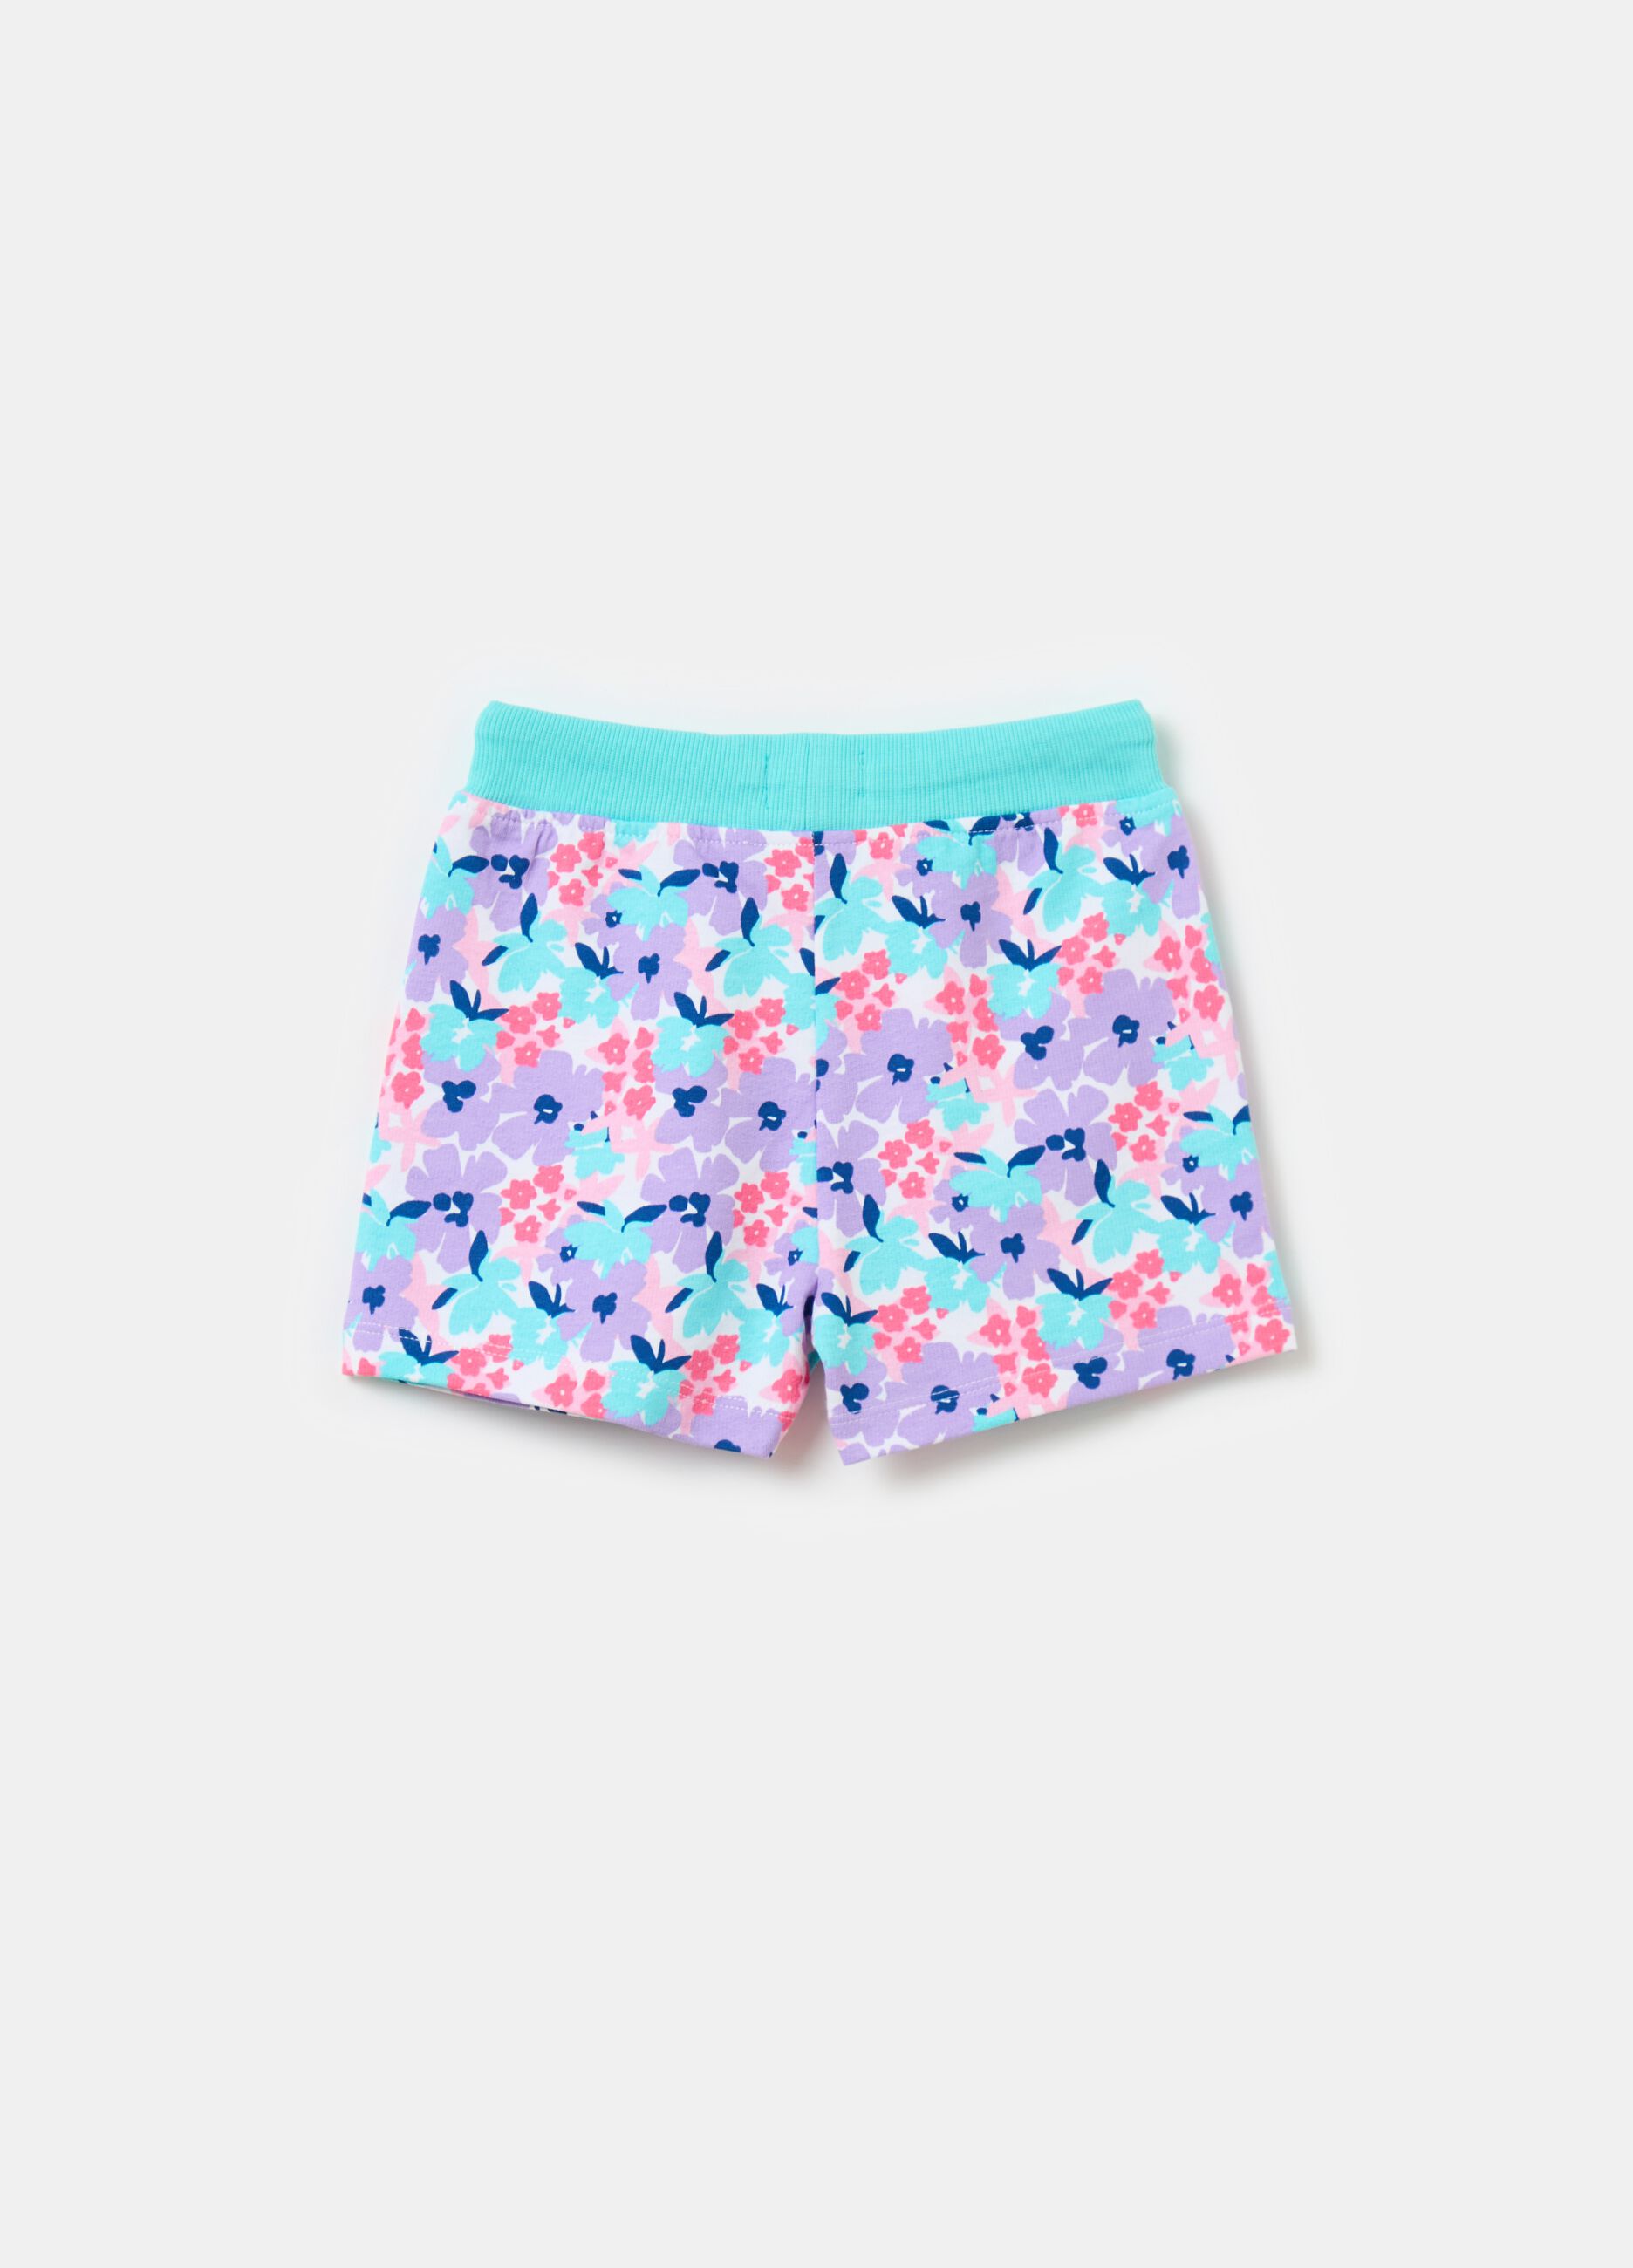 Shorts with drawstring and small flowers print